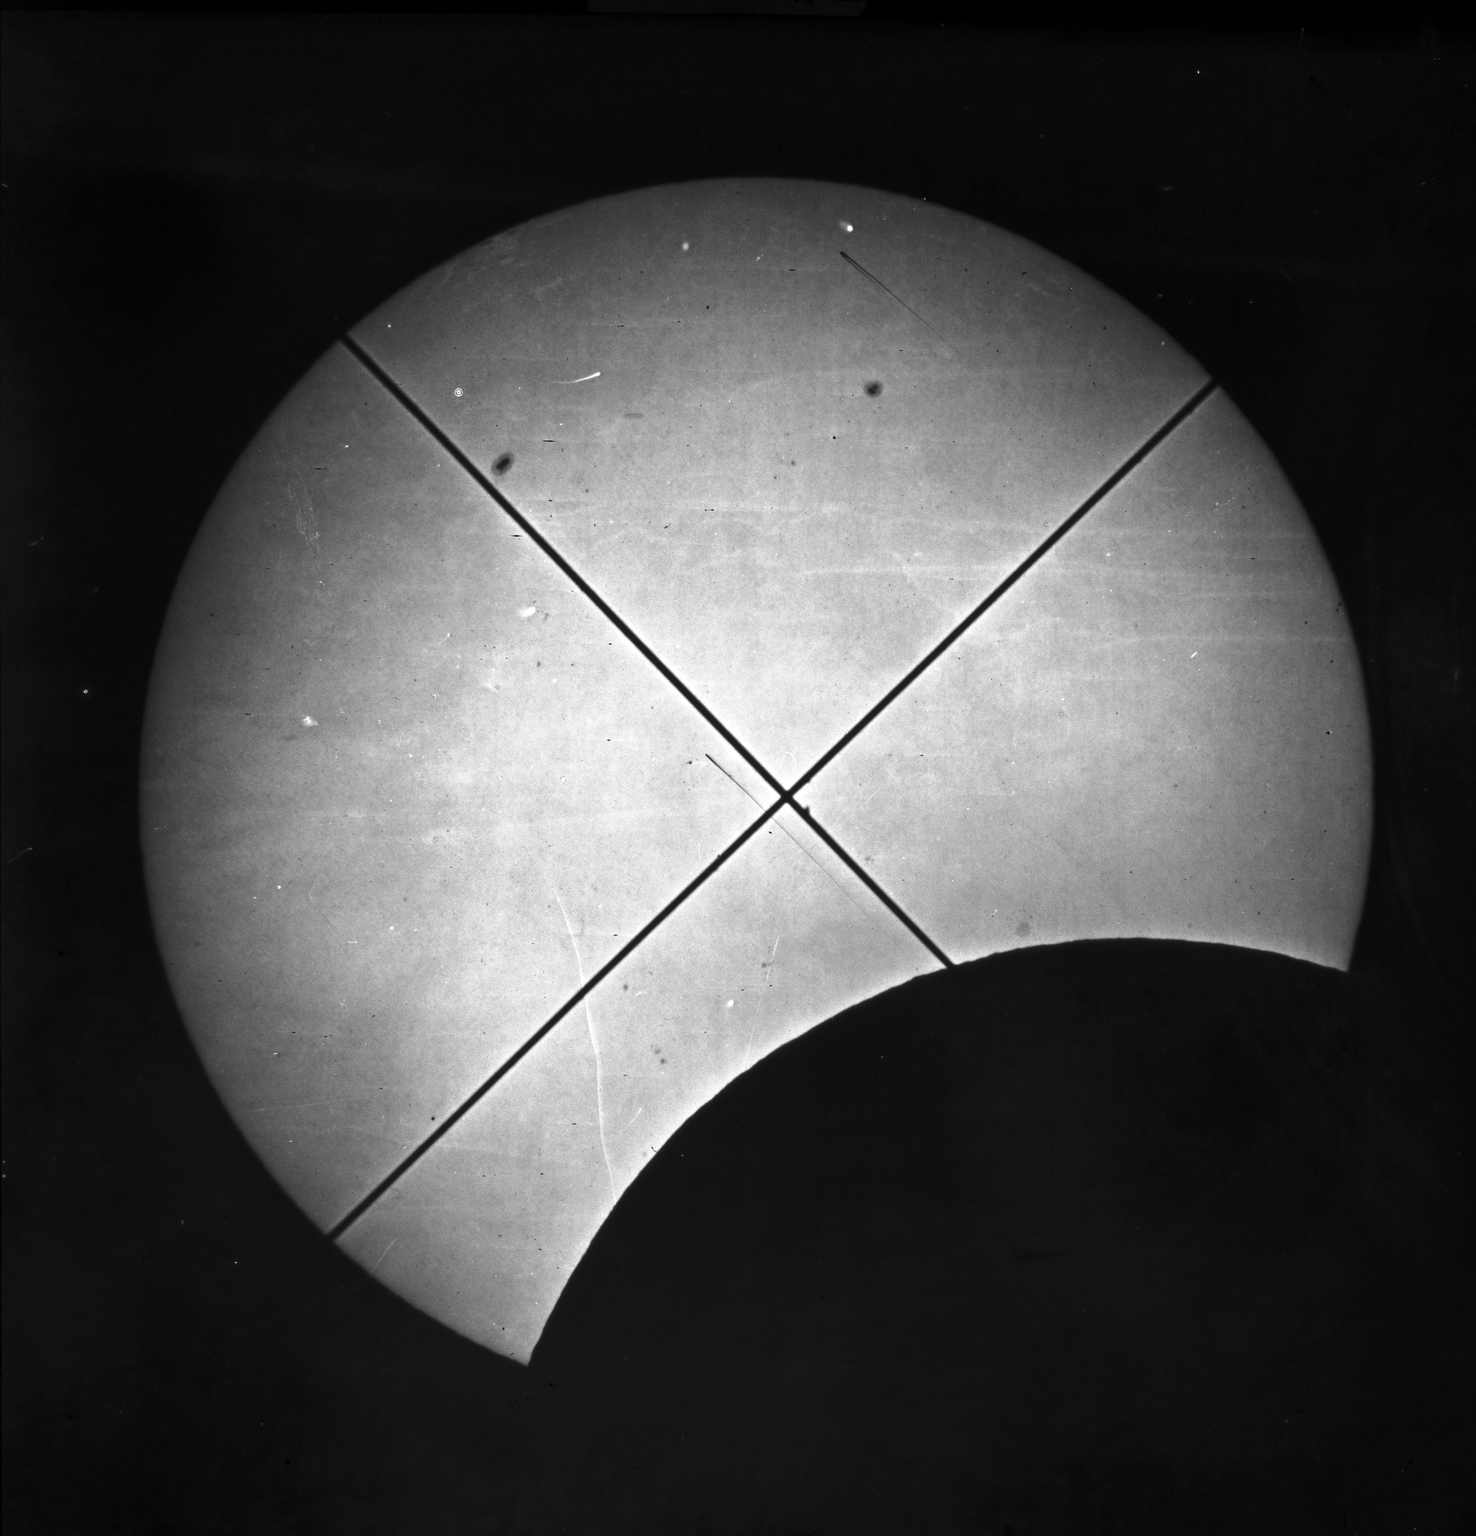 The start of the 1860 eclipse as captured by the Kew photoheliograph. (Science Museum Group. Object no. 1862-122)